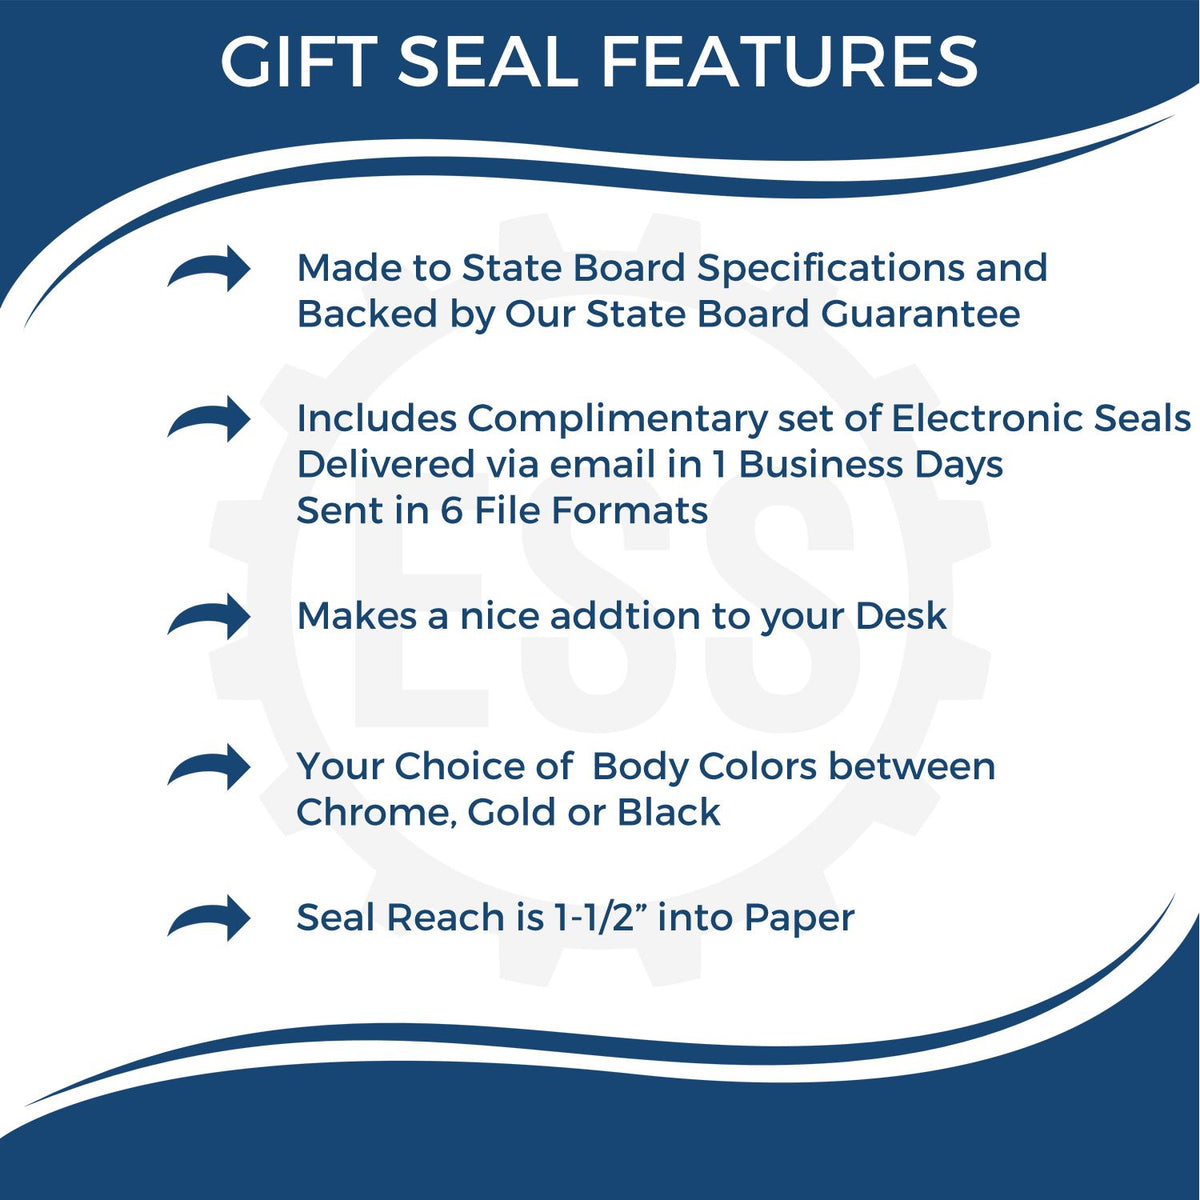 A picture of an infographic highlighting the selling points for the Gift Maine Architect Seal